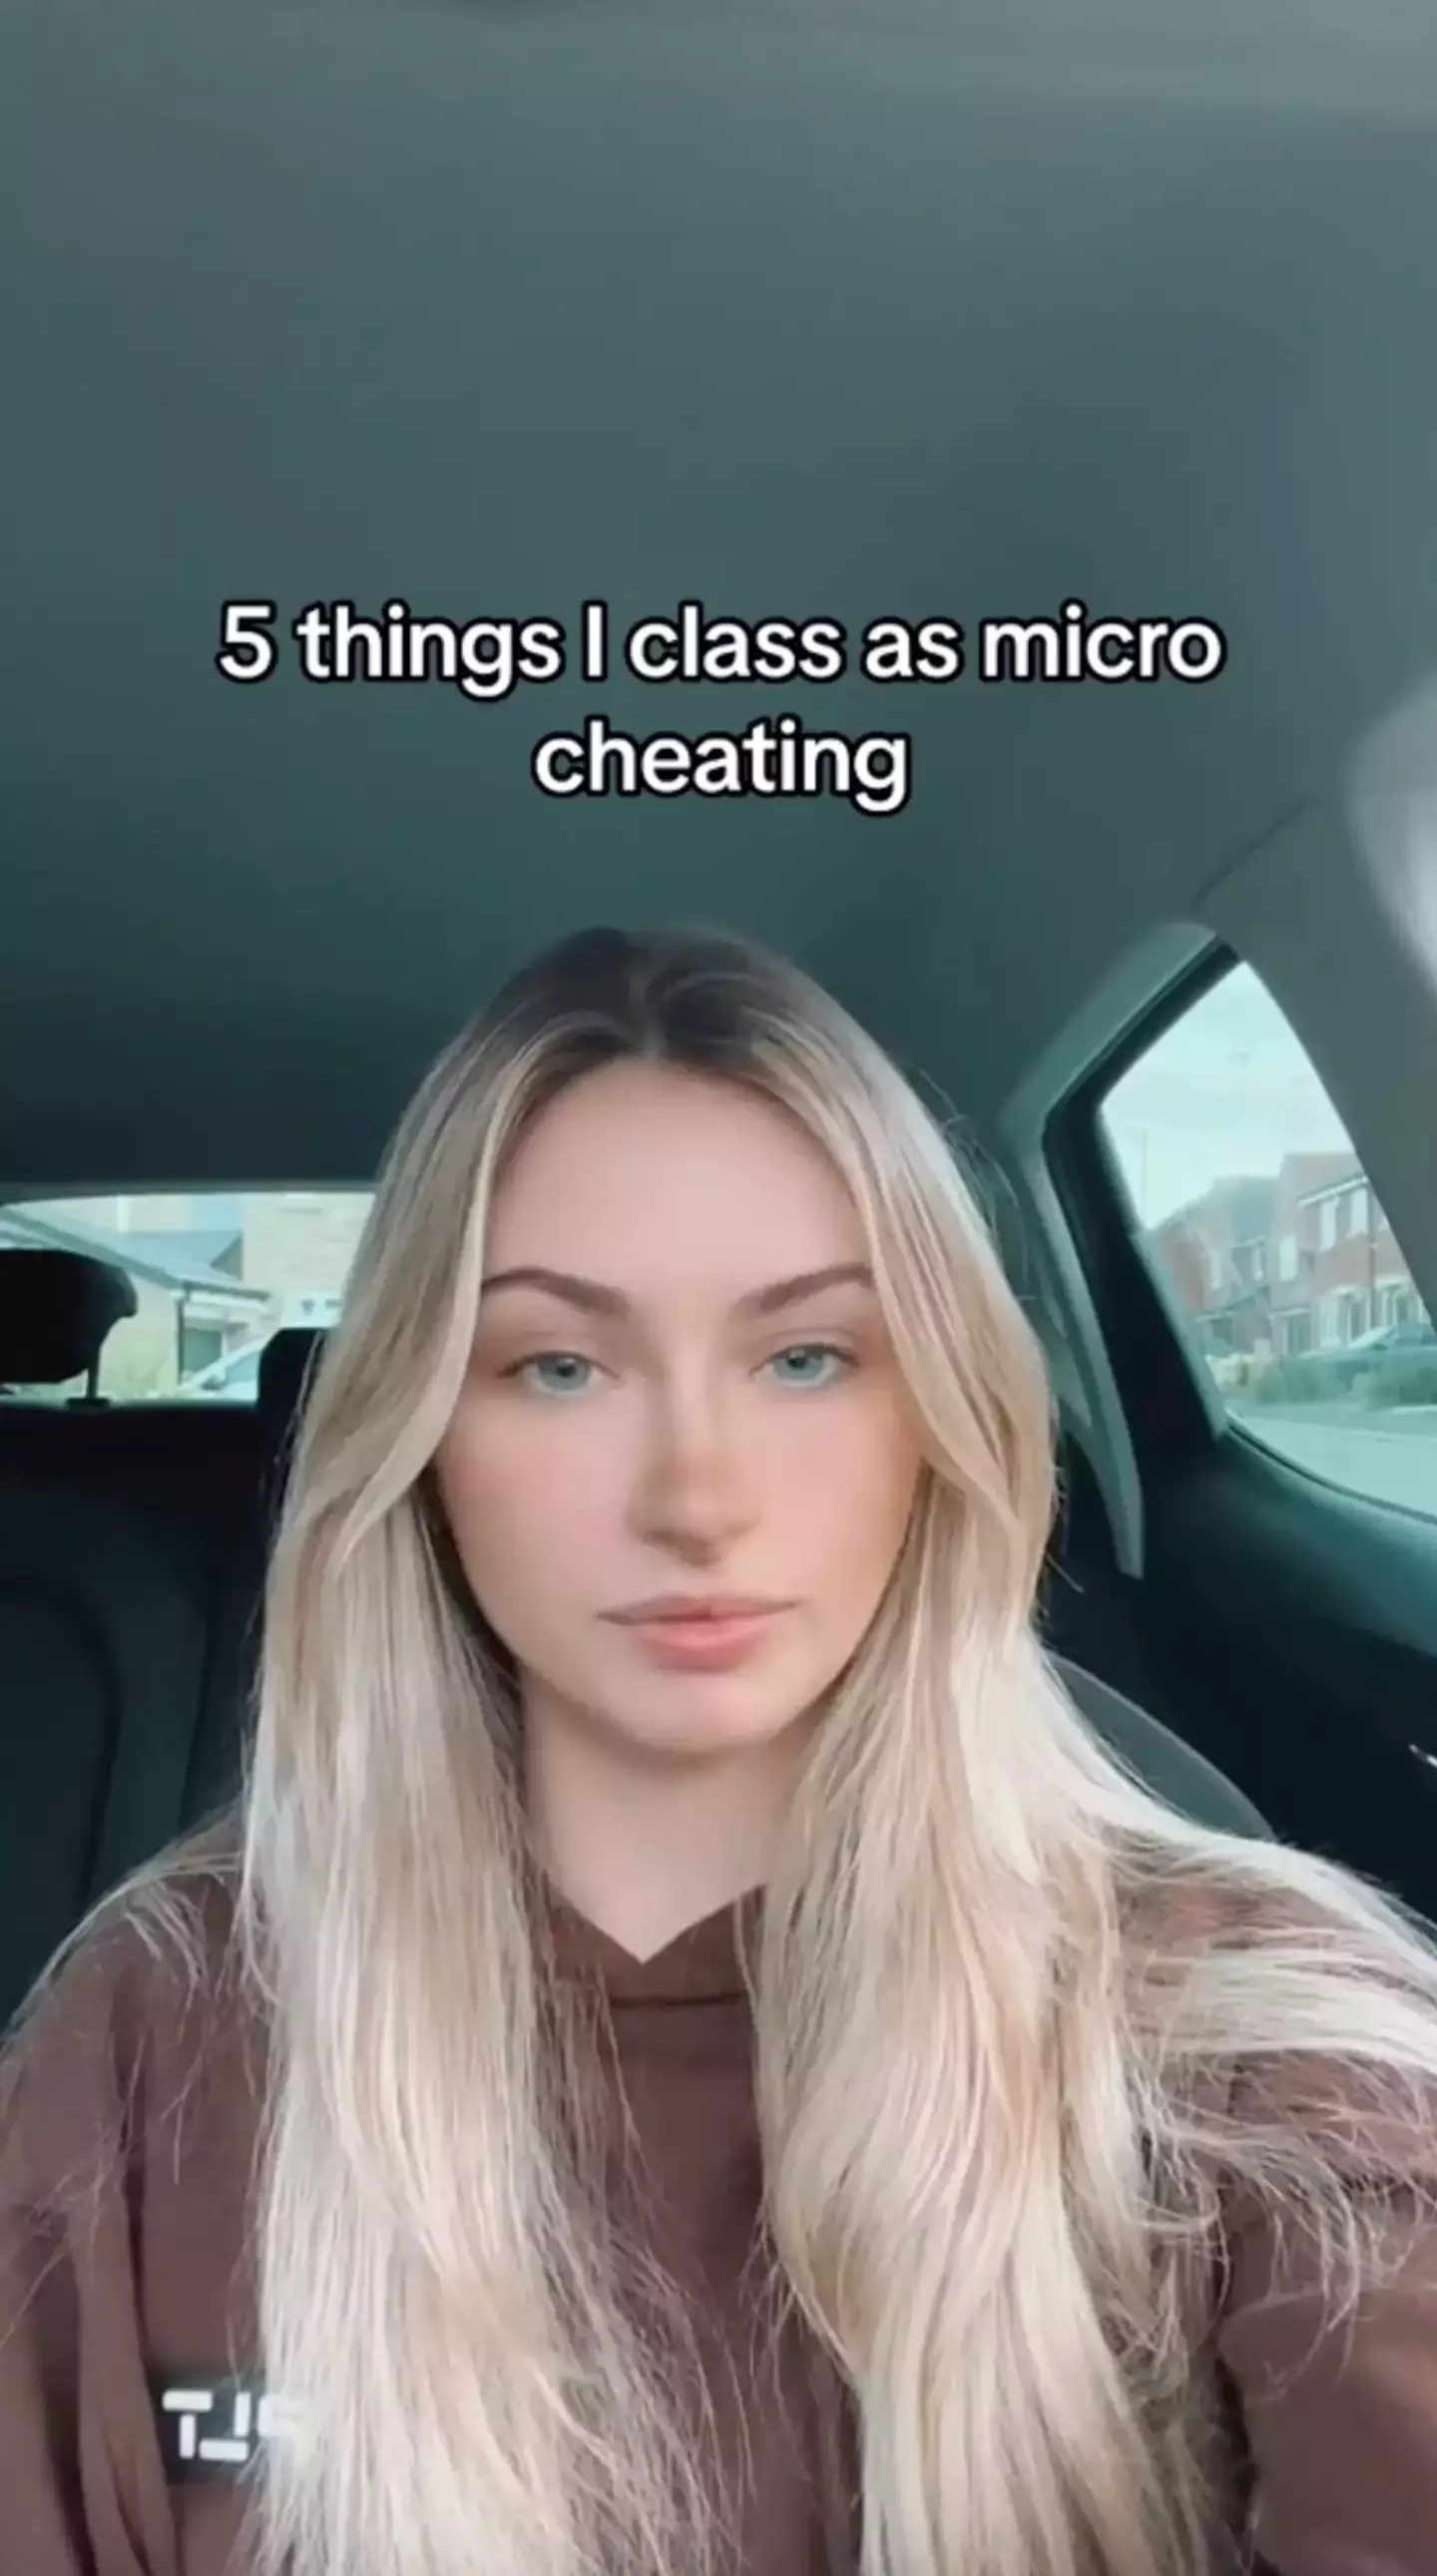 'Micro-cheating' is currently having its moment on TikTok.